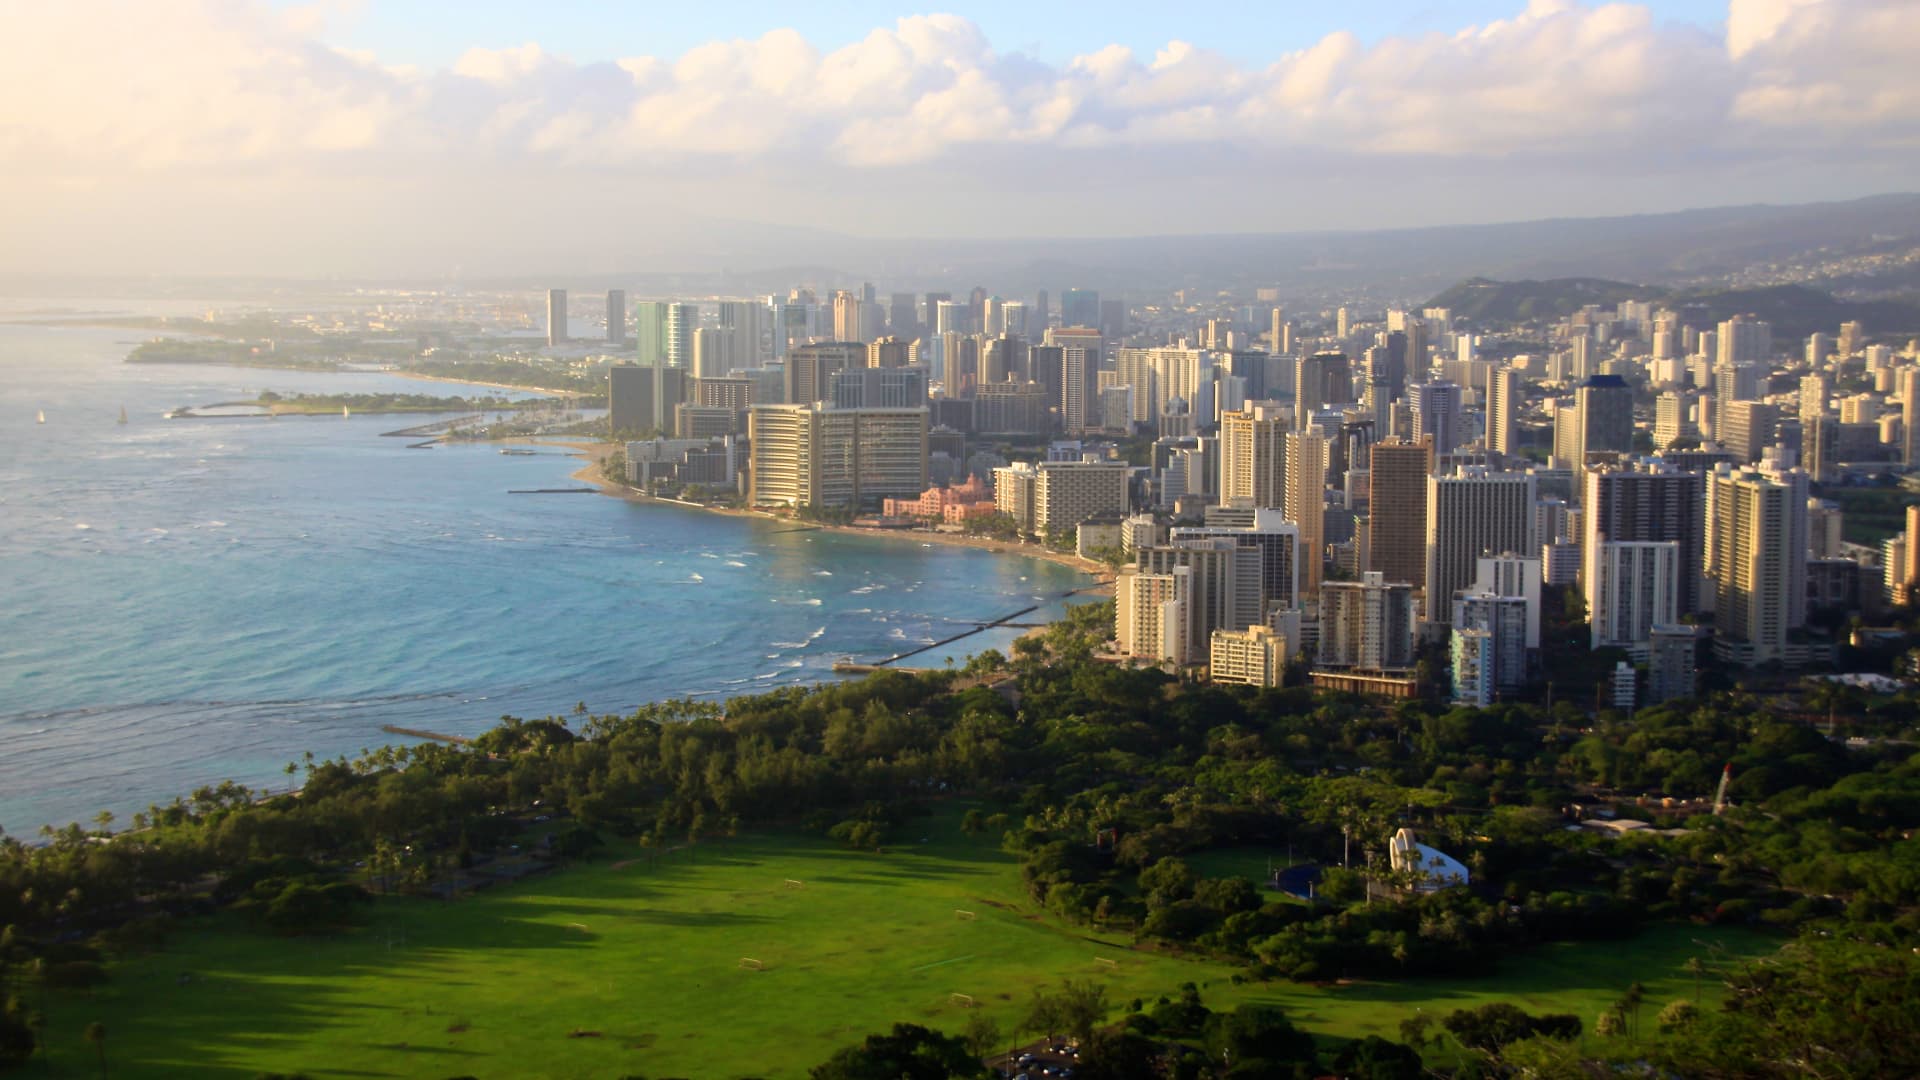 Hawaii ranked as the state with the highest average rent, according to doxo.